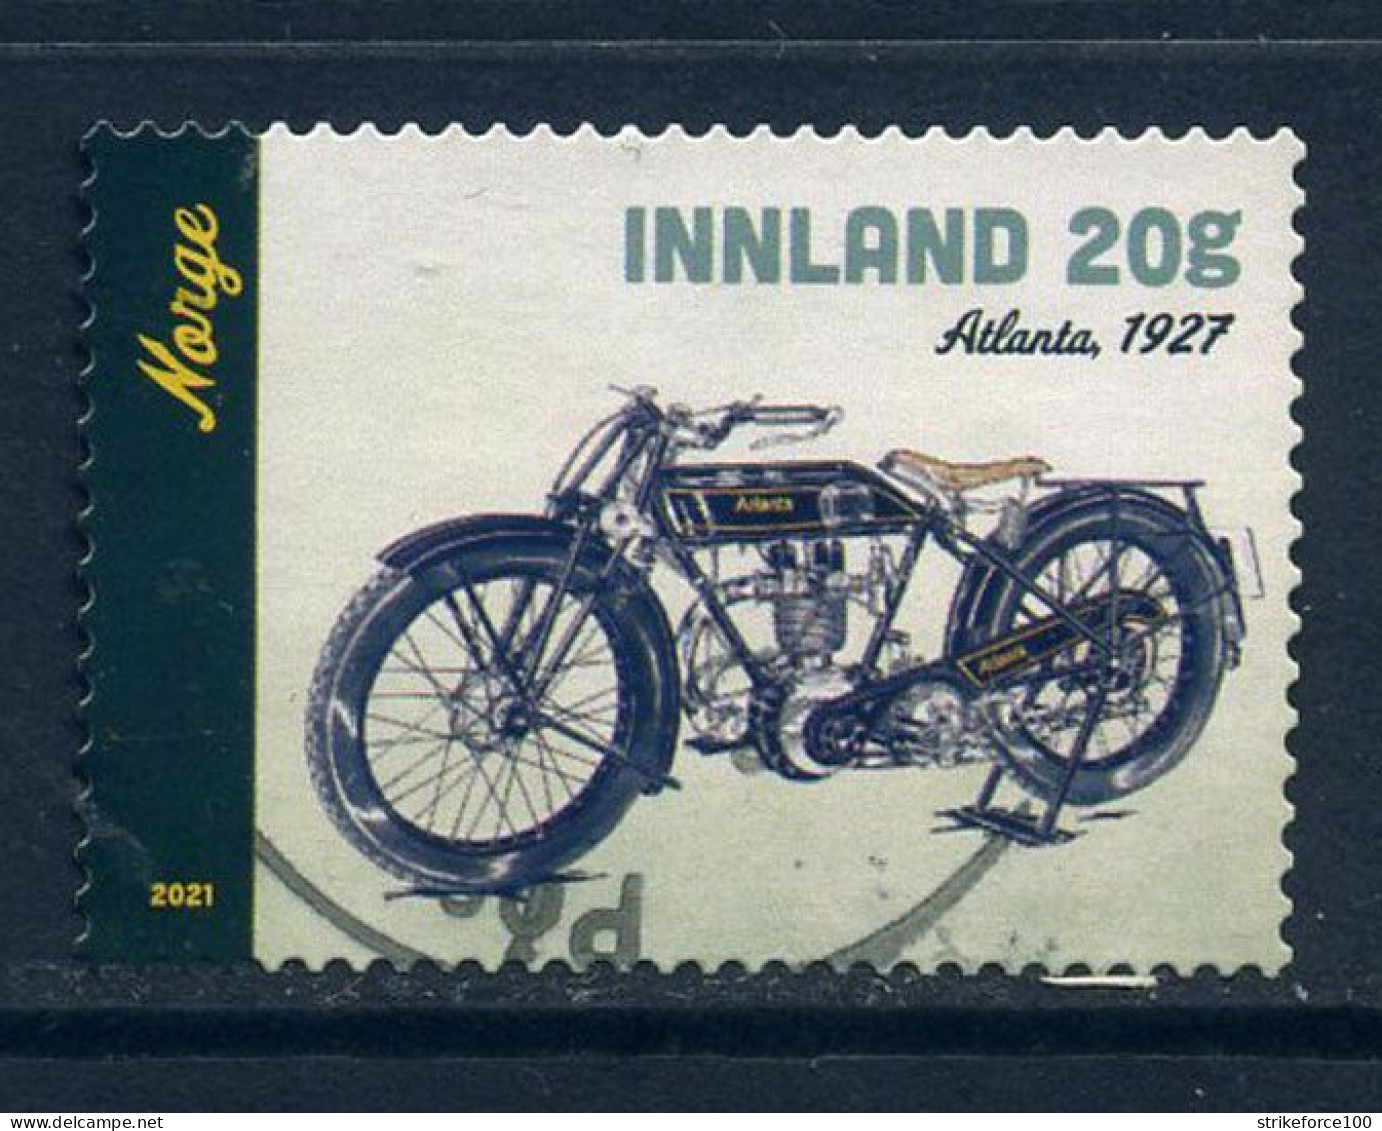 Norway 2021 - Moped & Motorcycles, Used Stamp. - Used Stamps